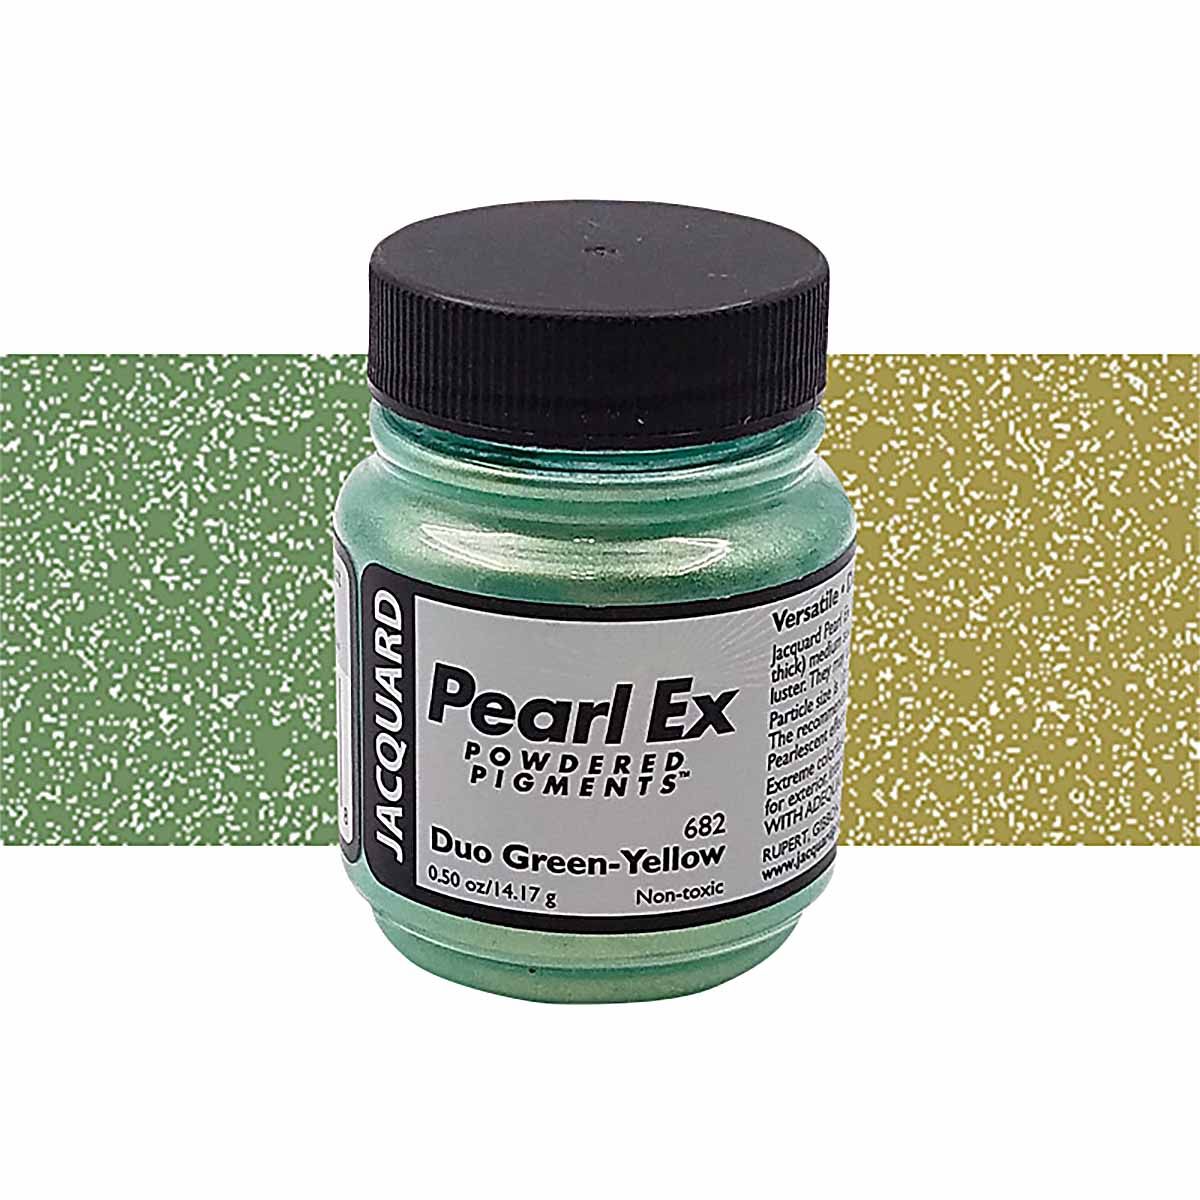 Pearl Ex Powdered Pigments by Jacquard 24 Color Set. Each Jar